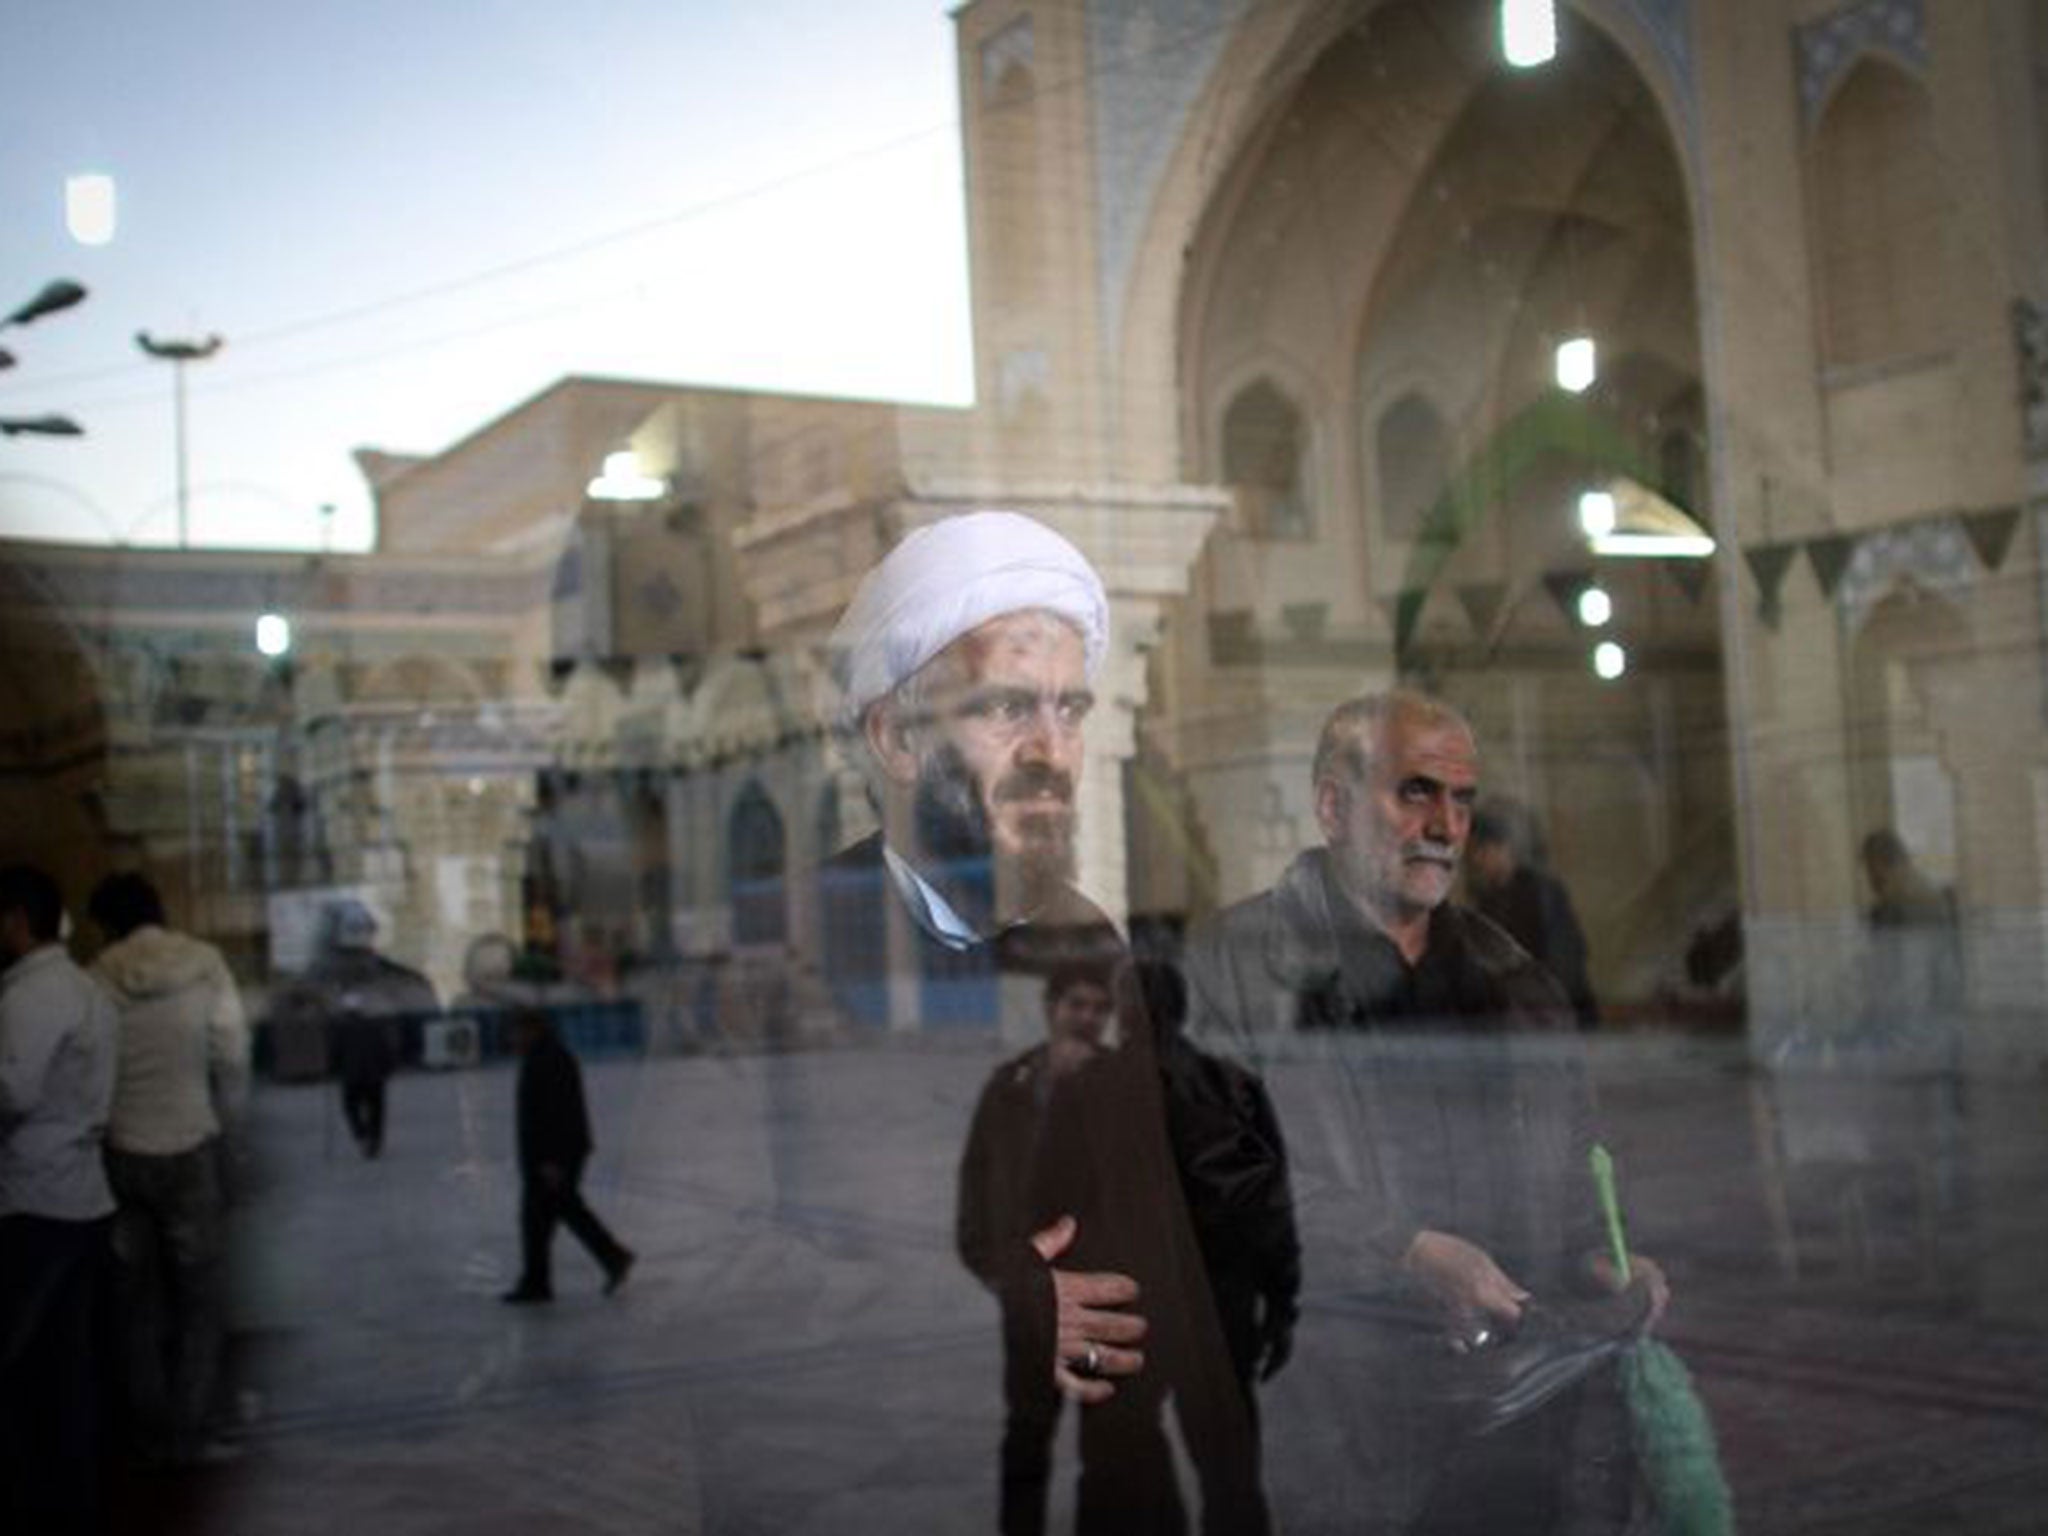 A cleric waits to cast his ballot papers at a polling station in Qom, during elections for Iran’s parliament, the Majlis, and the Assembly of Experts